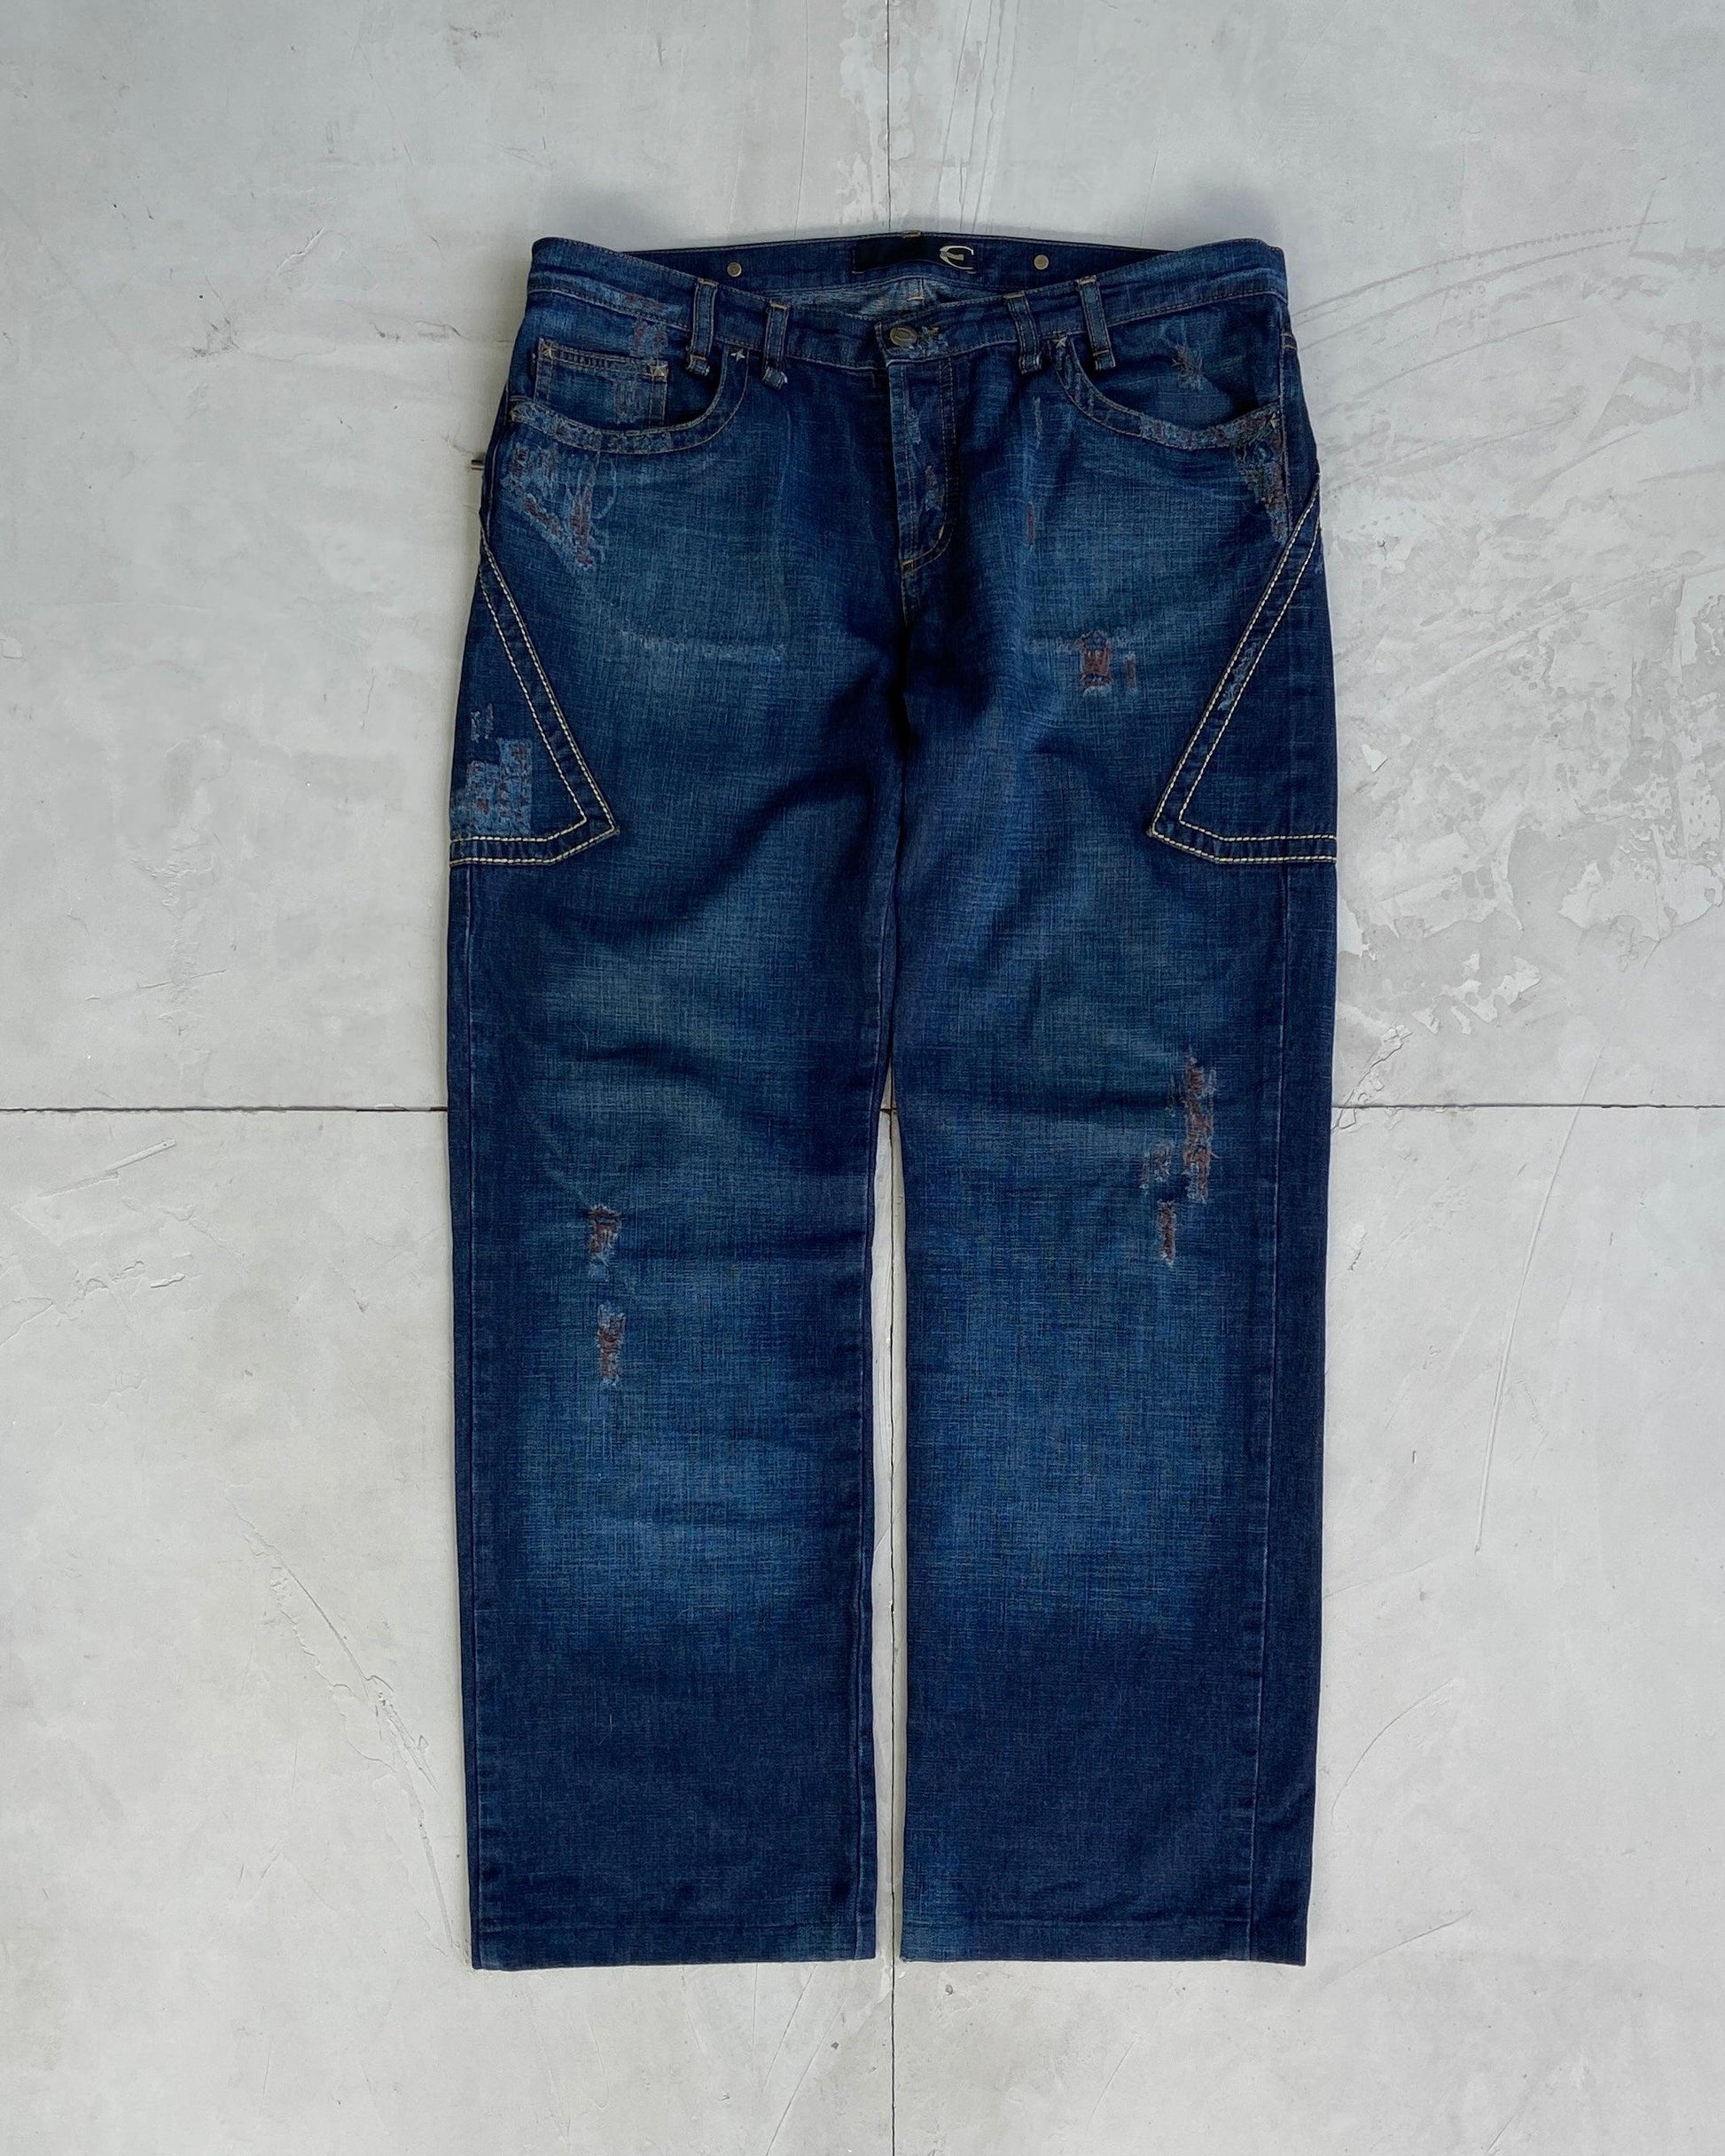 JUST CAVALLI DISTRESSED JEANS - W36" - Known Source